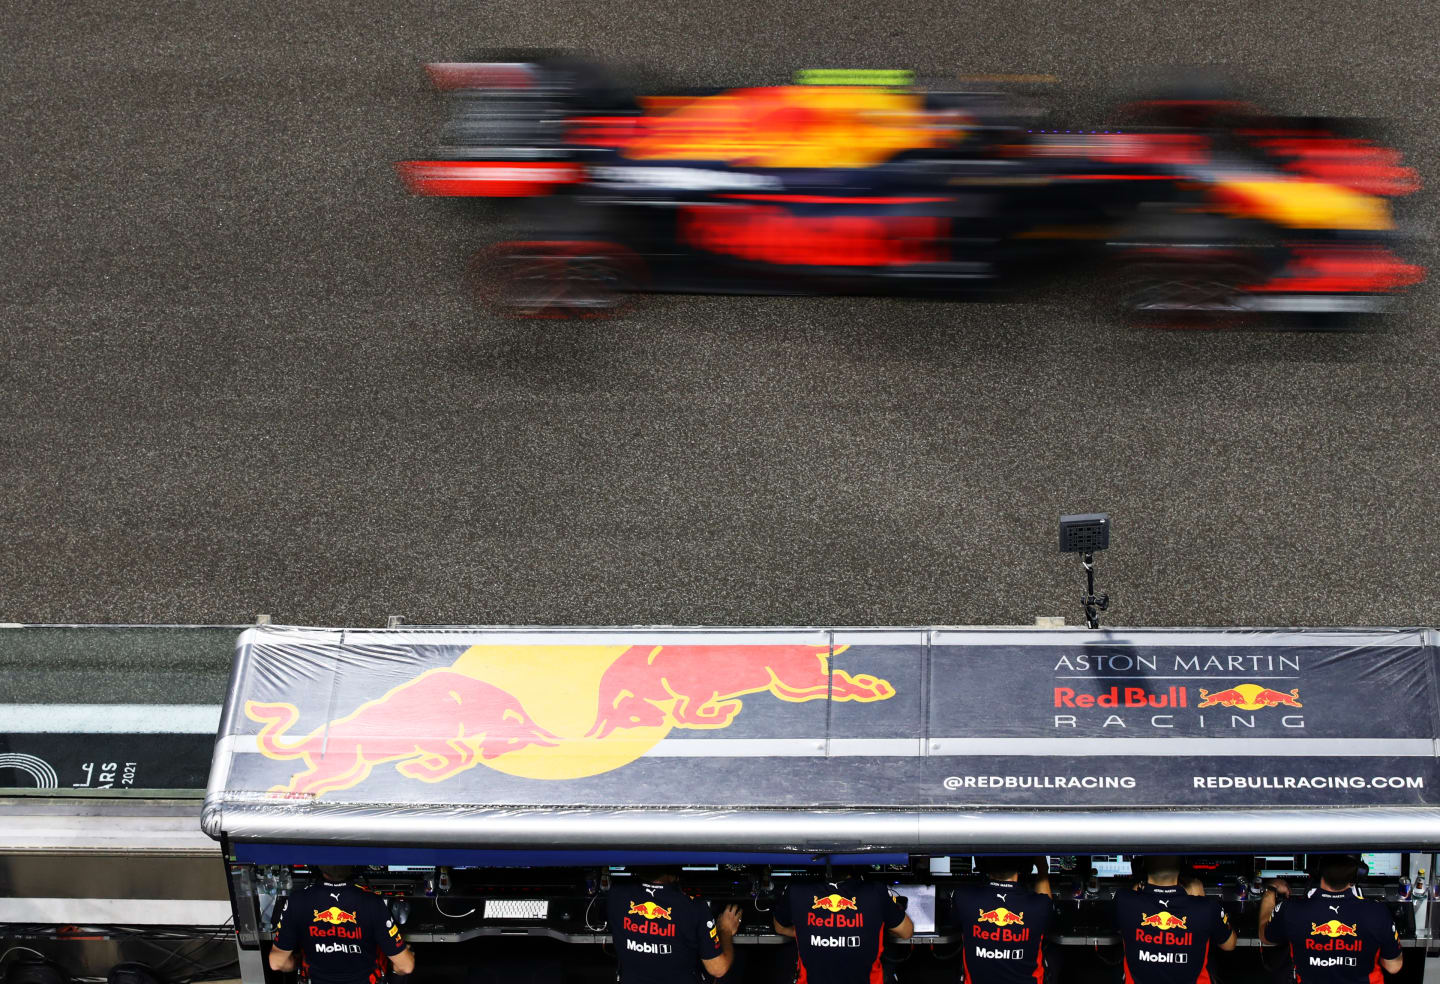 ABU DHABI, UNITED ARAB EMIRATES - DECEMBER 12: Alexander Albon of Thailand driving the (23) Aston Martin Red Bull Racing RB16 passes the Red Bull Racing pitwall during qualifying ahead of the F1 Grand Prix of Abu Dhabi at Yas Marina Circuit on December 12, 2020 in Abu Dhabi, United Arab Emirates. (Photo by Mark Thompson/Getty Images)